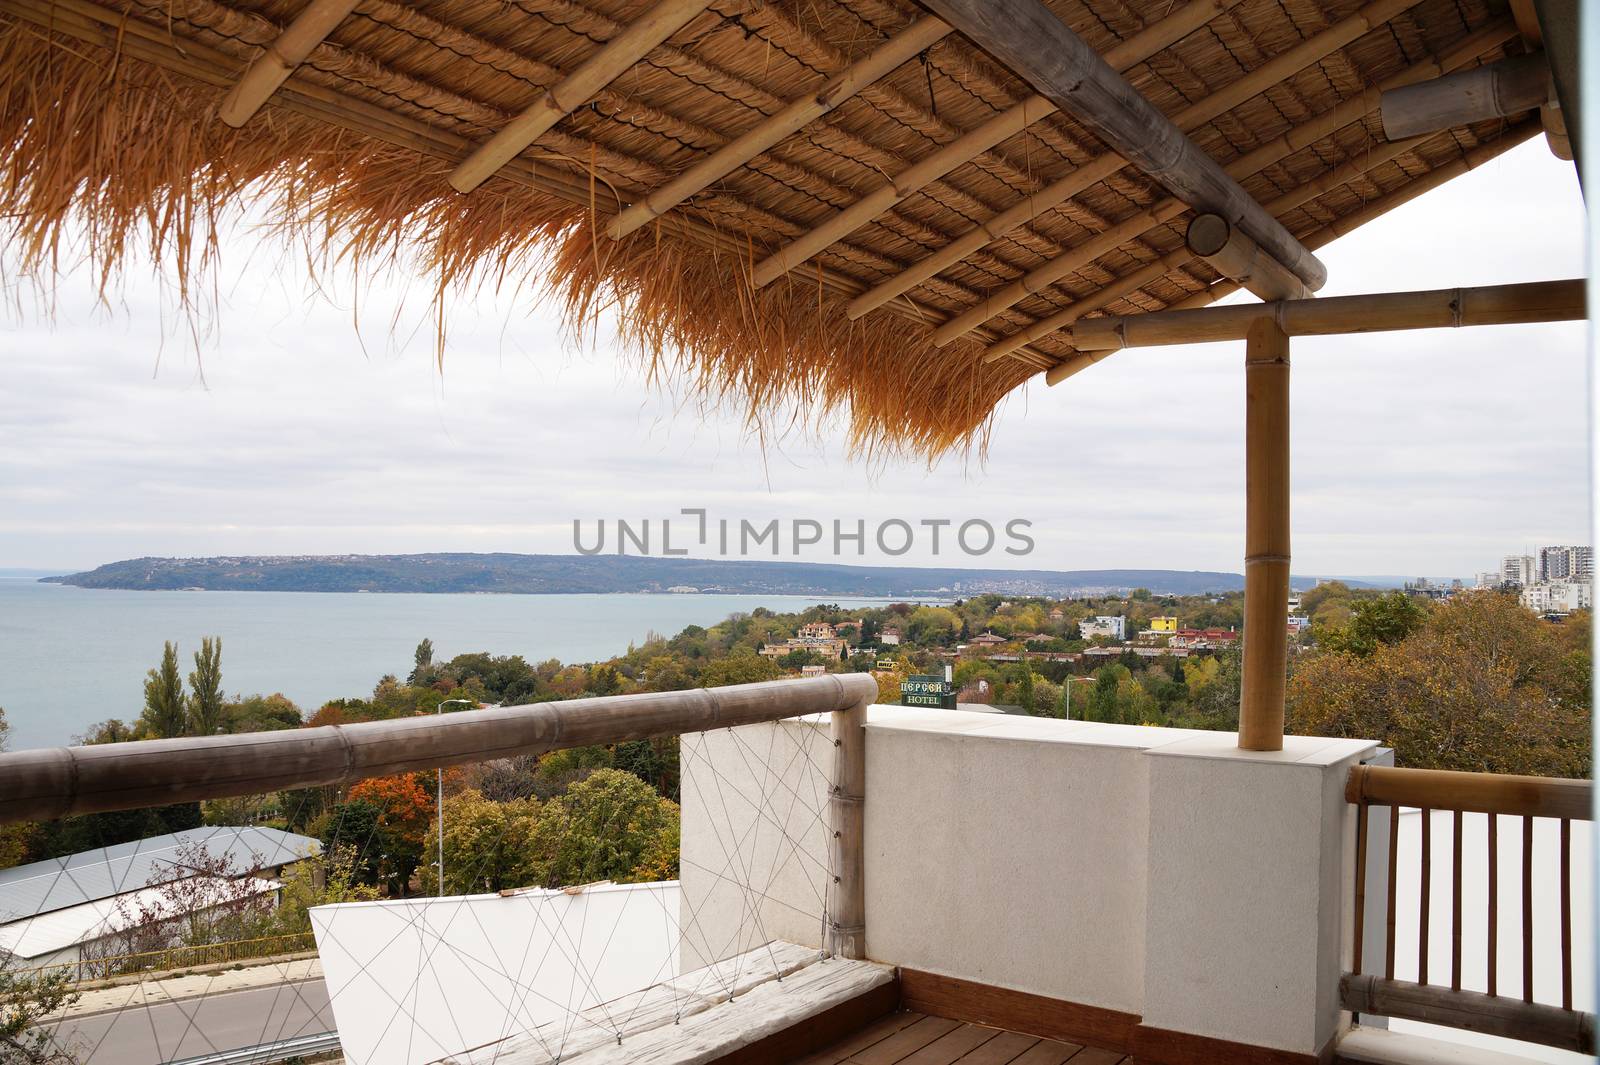 thatched roof terrace with sea view close up by Annado